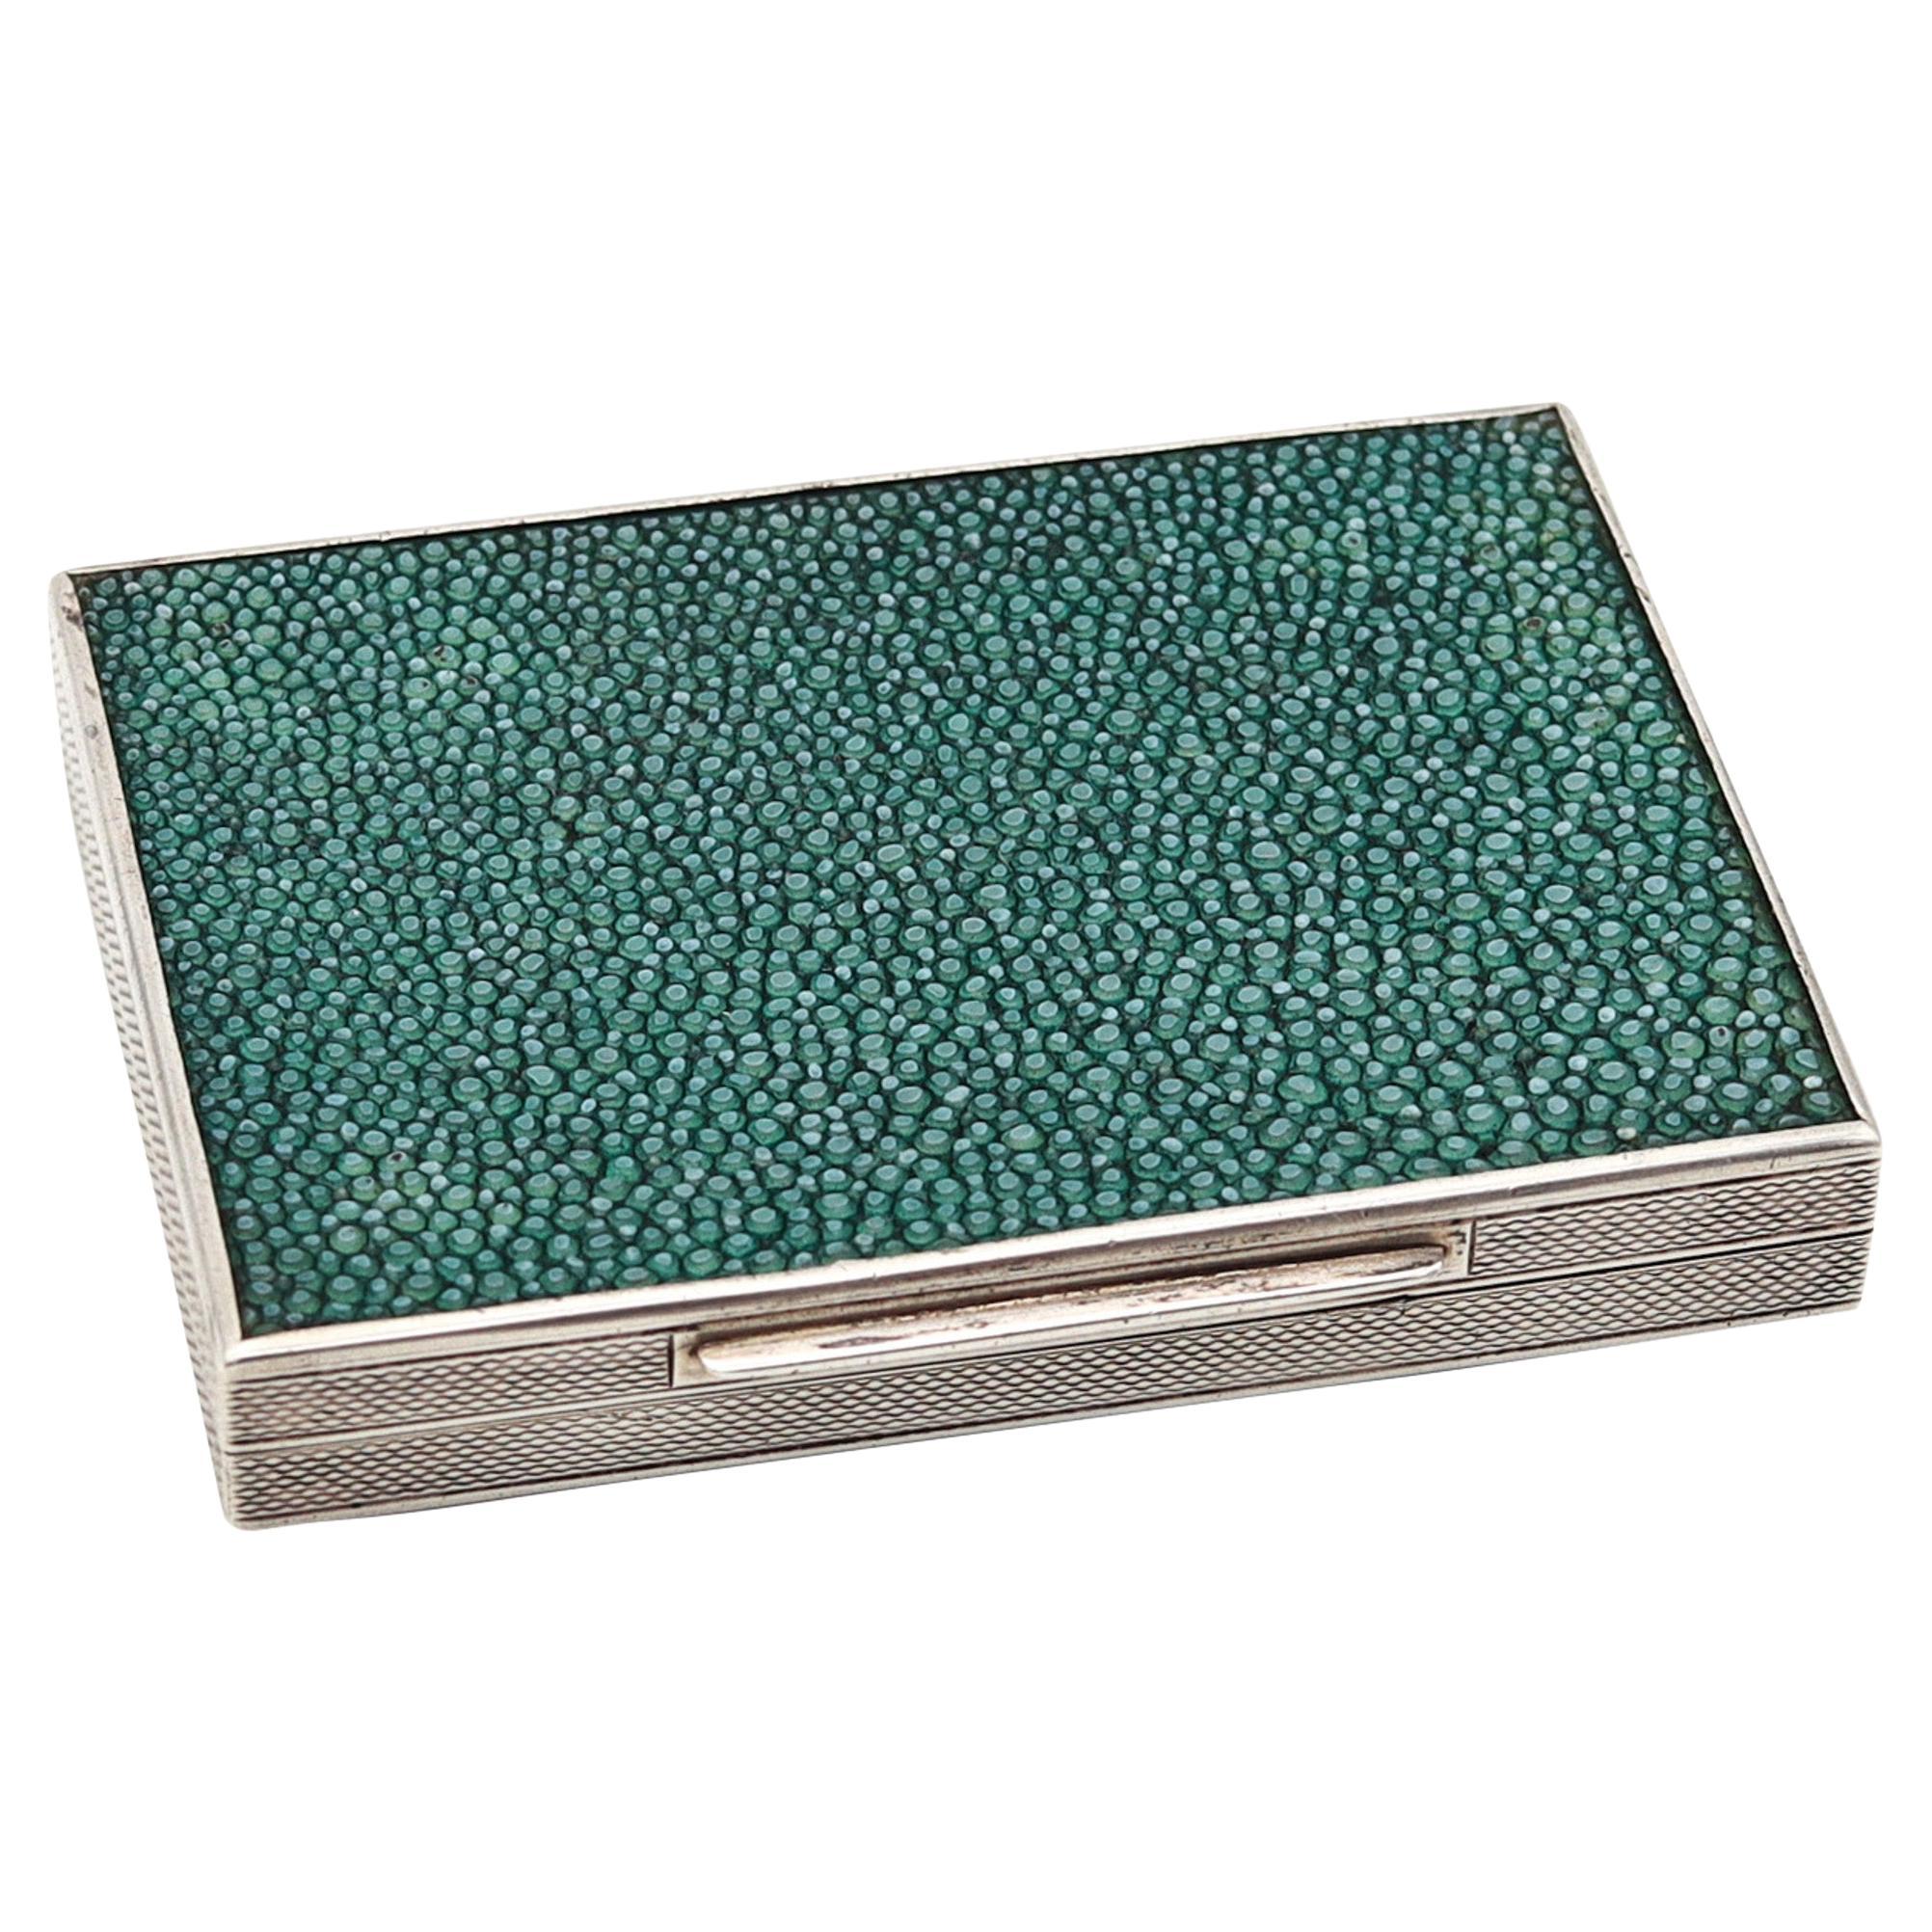 Alfred Dunhill 1940 London Rectangular Box Case In .925 Sterling And Shagreen